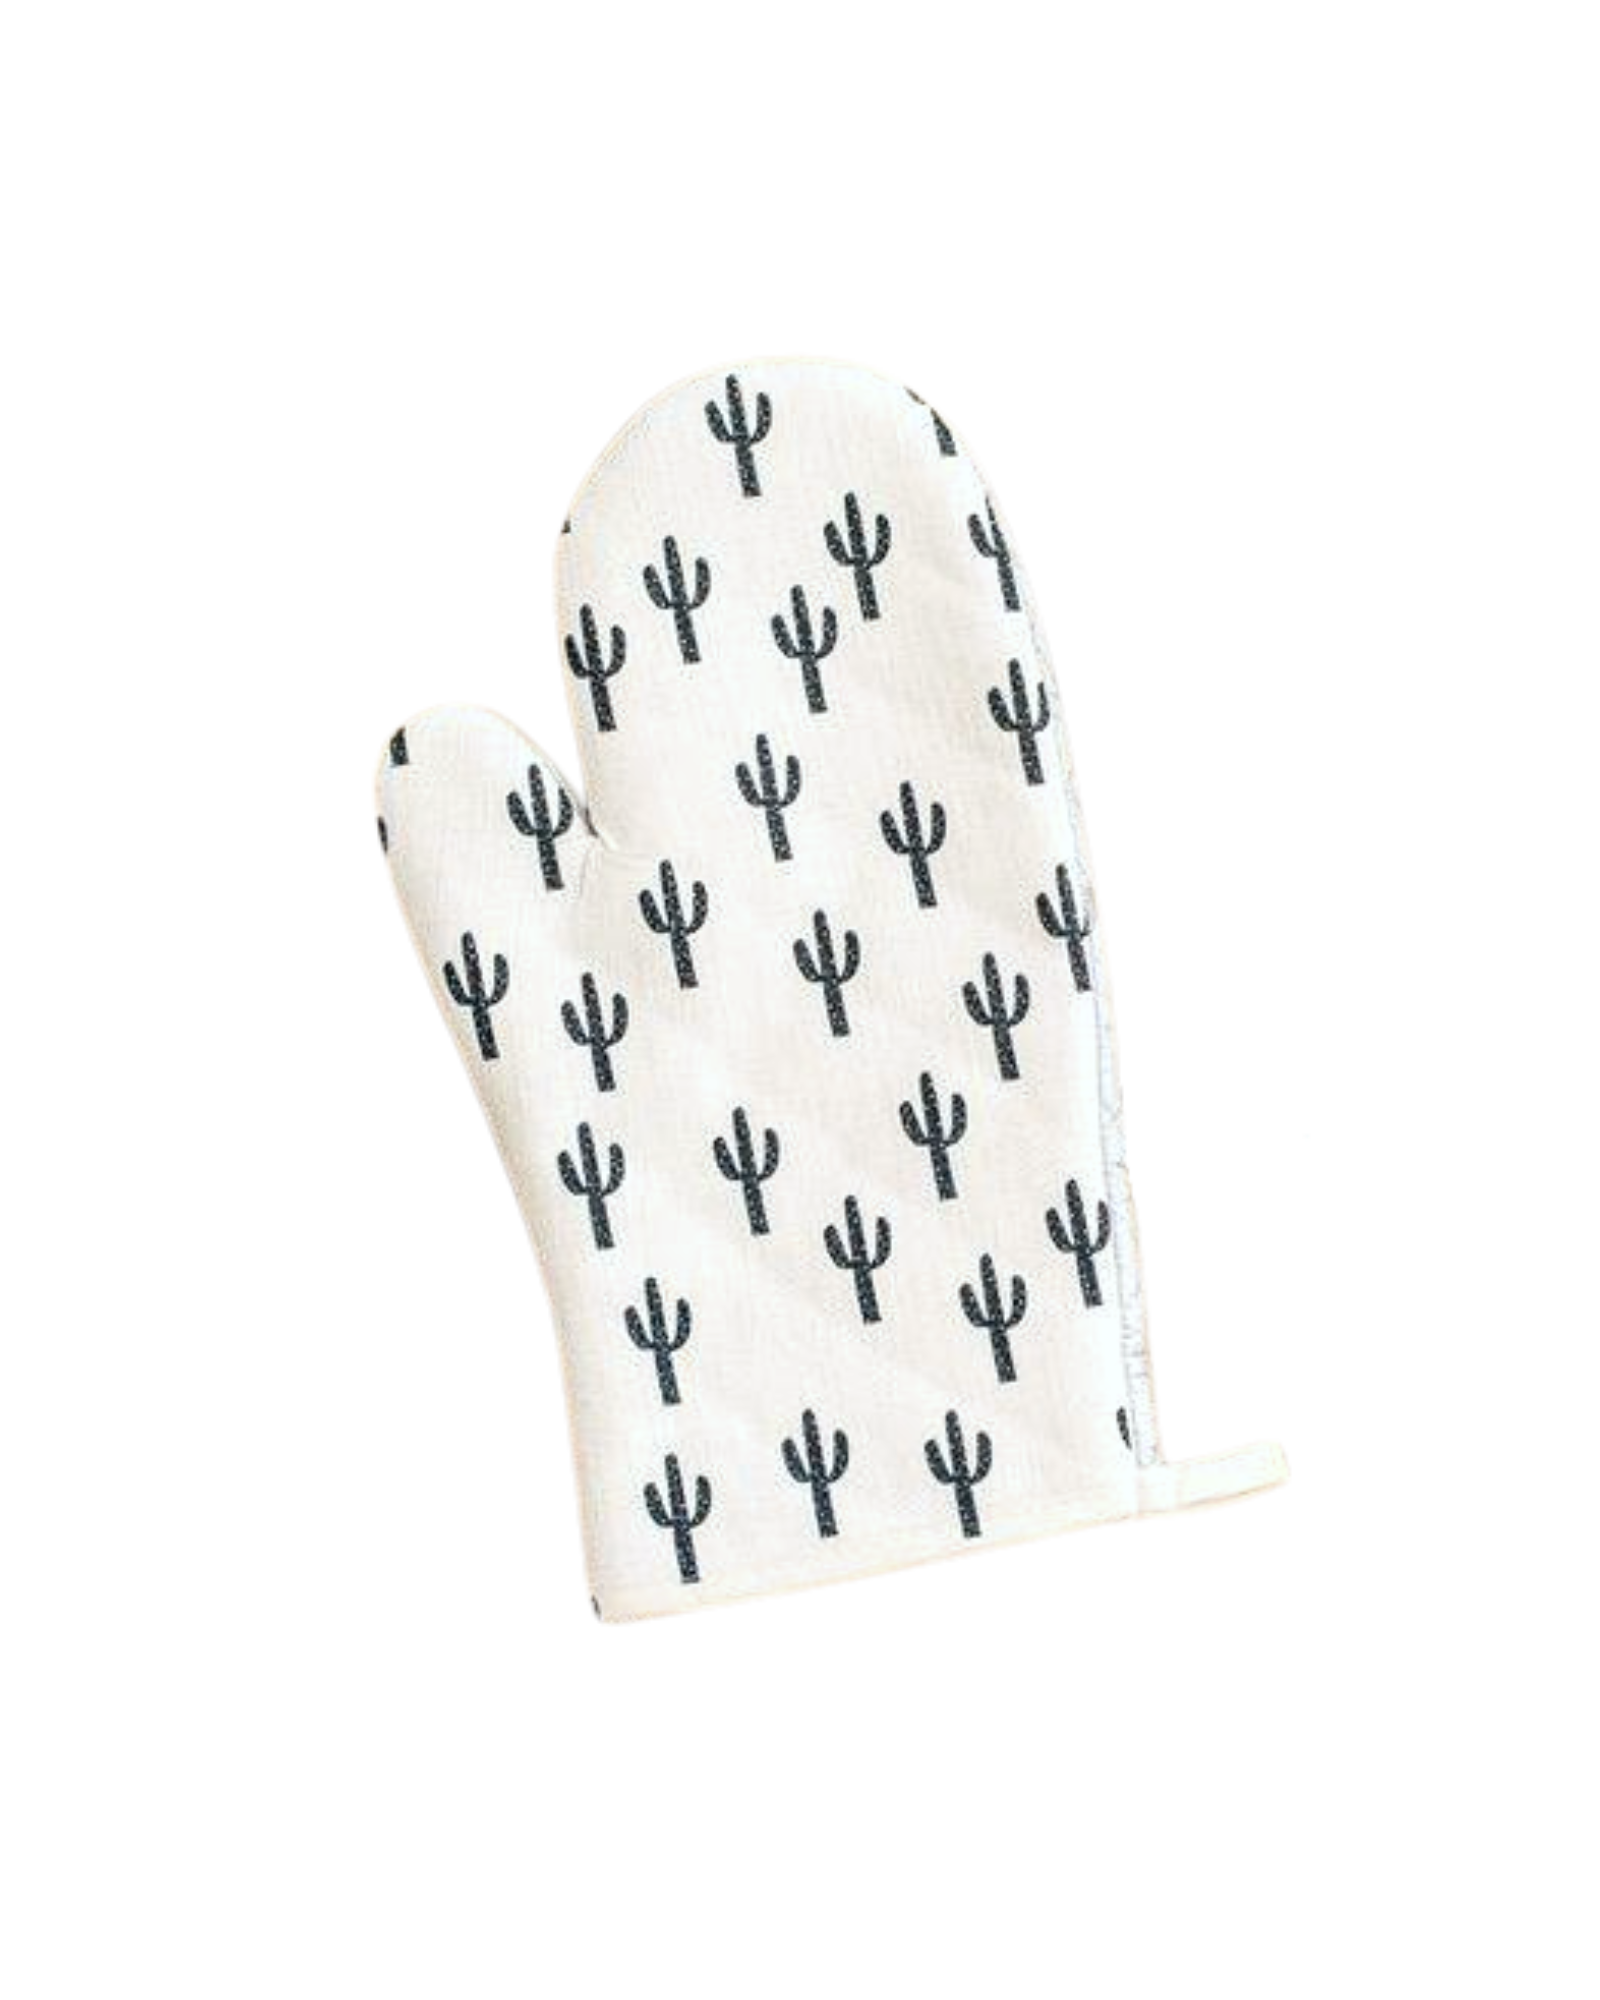 Right oven mitt with small black saguaro pattern